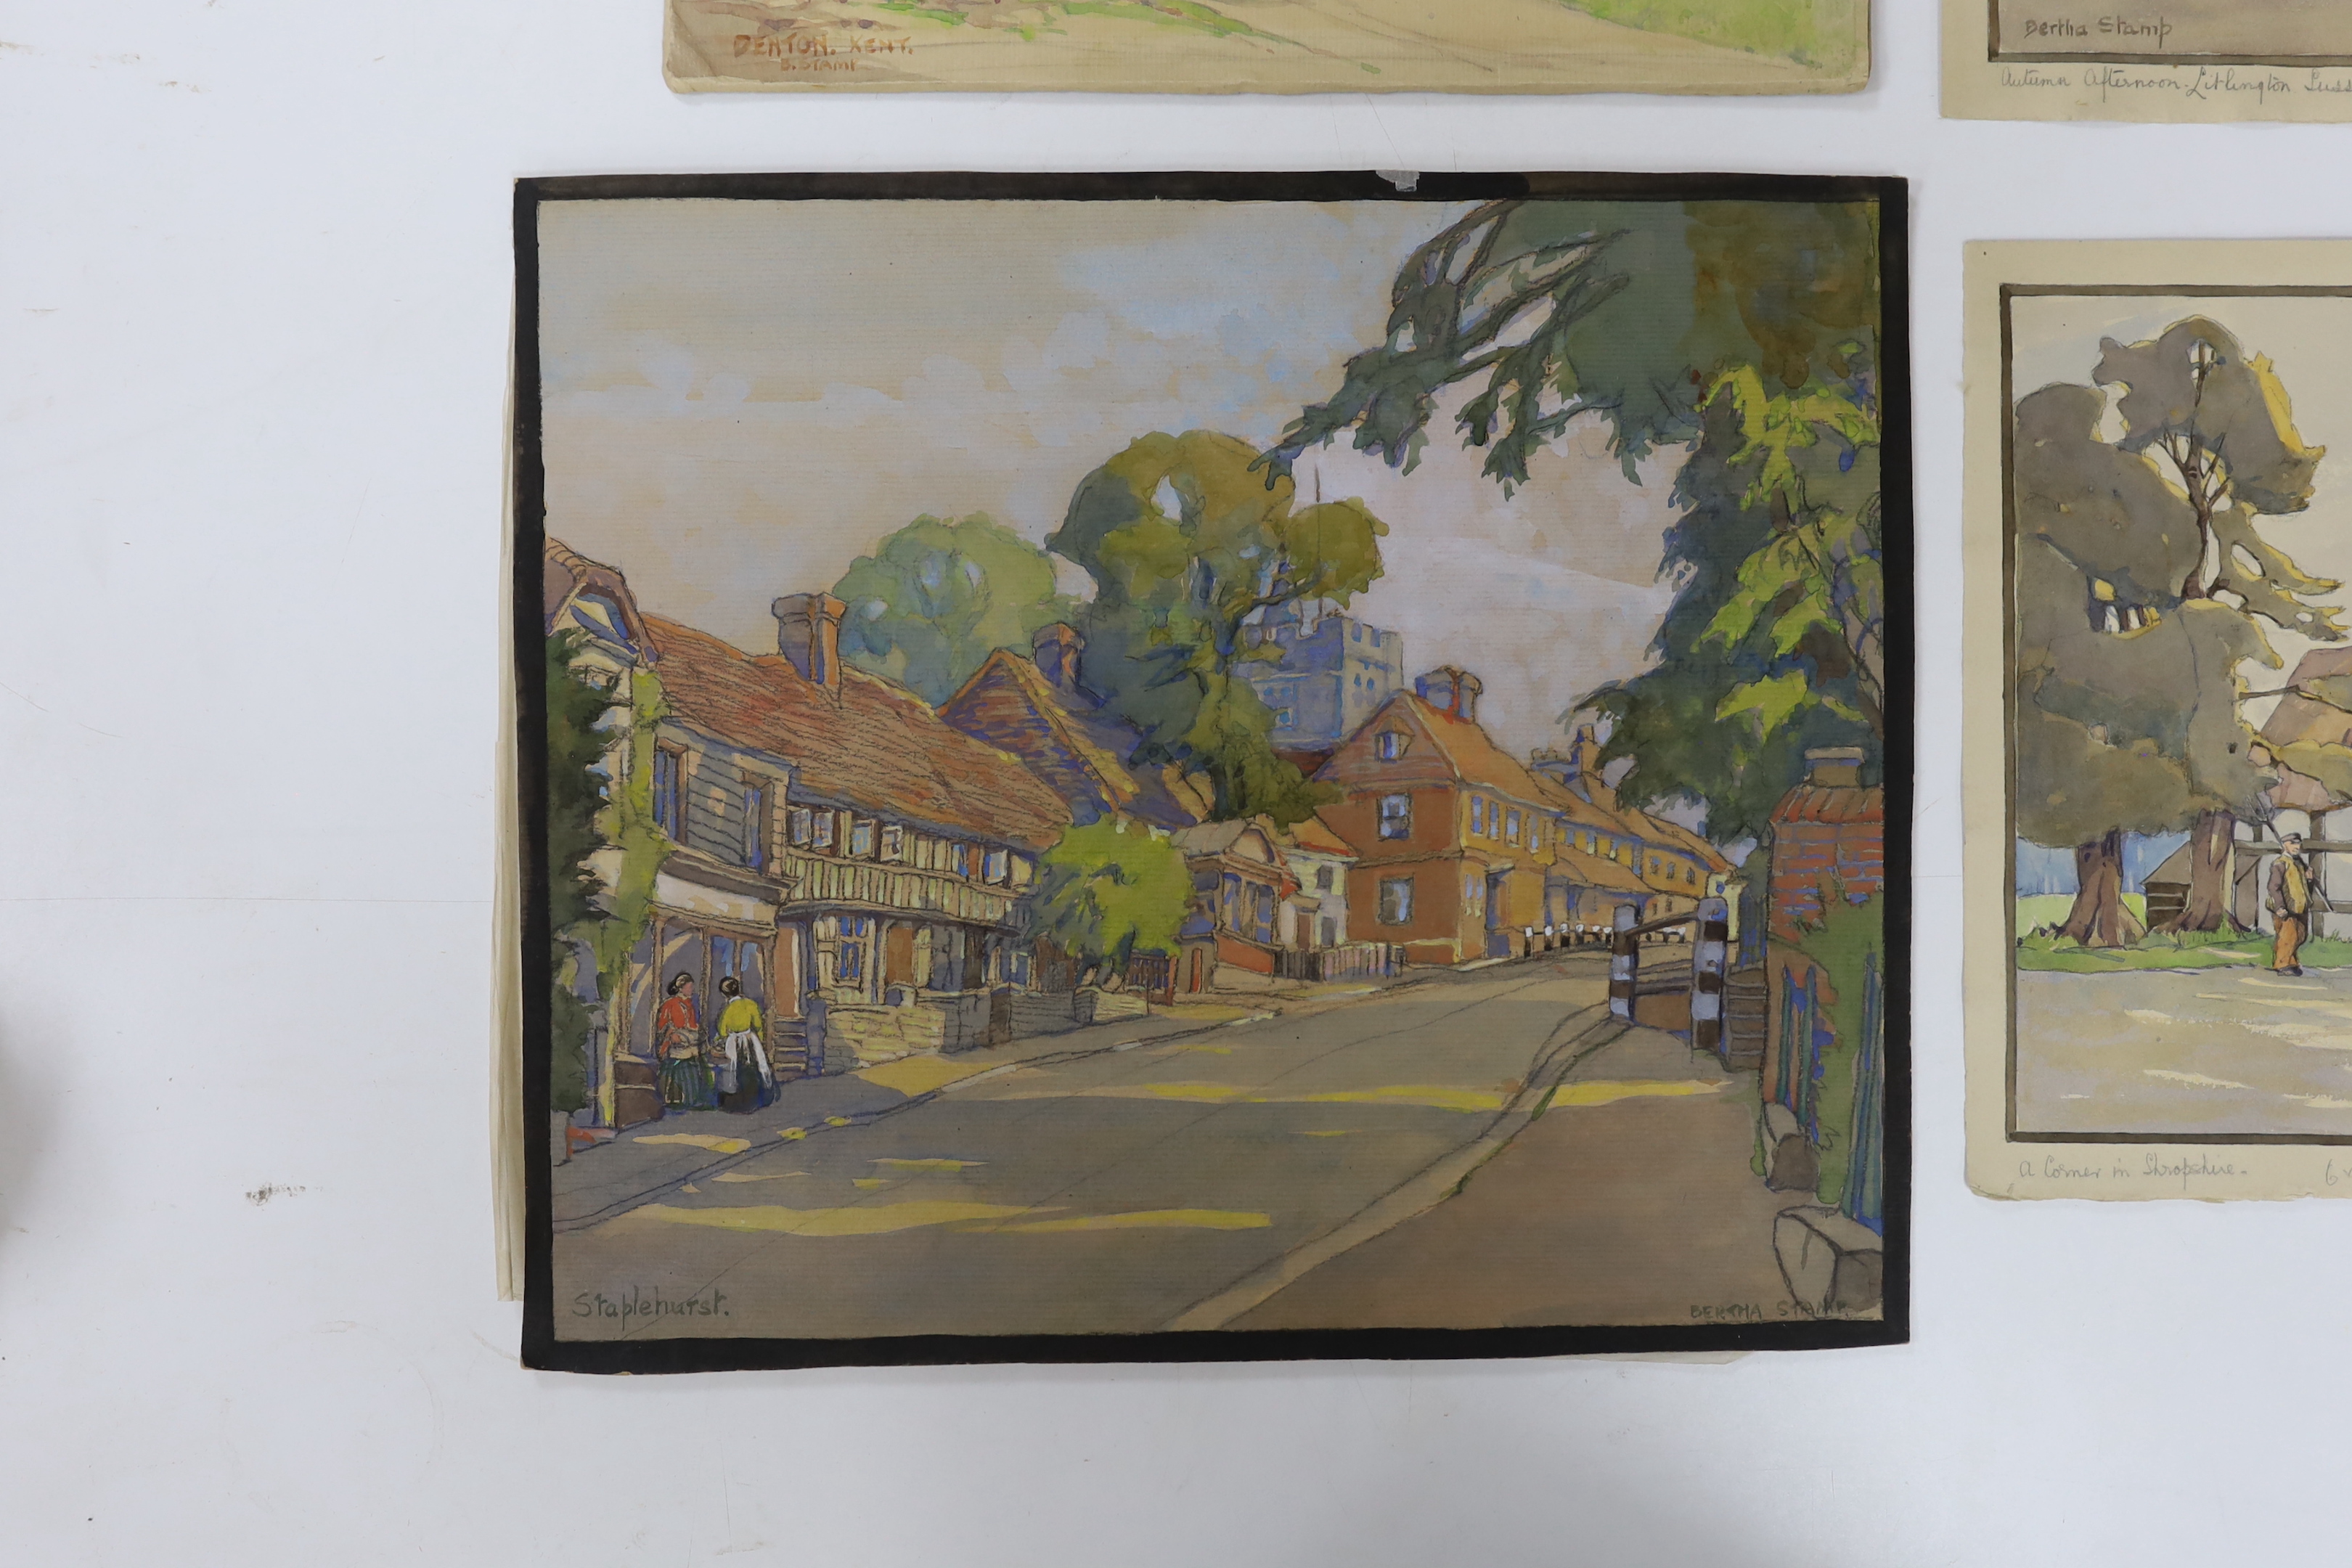 Bertha Stamp, four watercolours, English village scenes,' Autumn afternoon, Litlington, Sussex', 'An old corner in Shropshire', 'Denton, Kent' and 'Staplehurst, Kent', each signed, largest 42 x 35cm, unframed